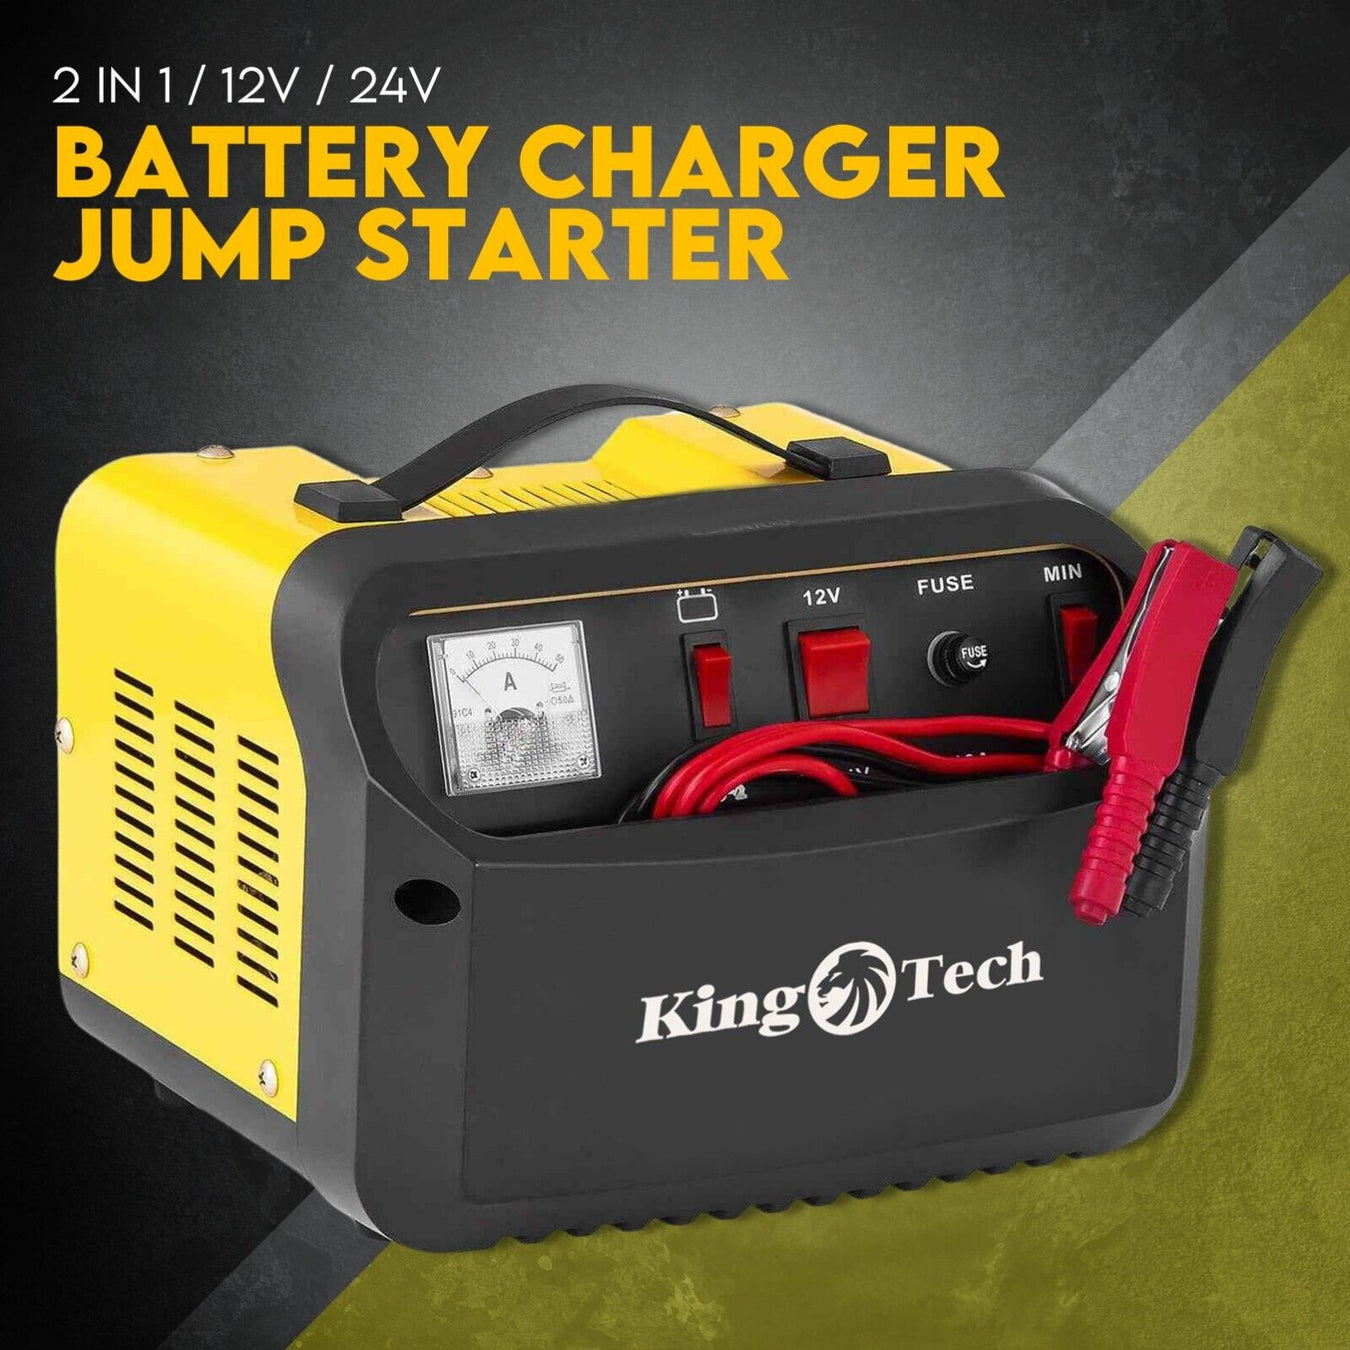 CHARGERS & JUMP STARTERS